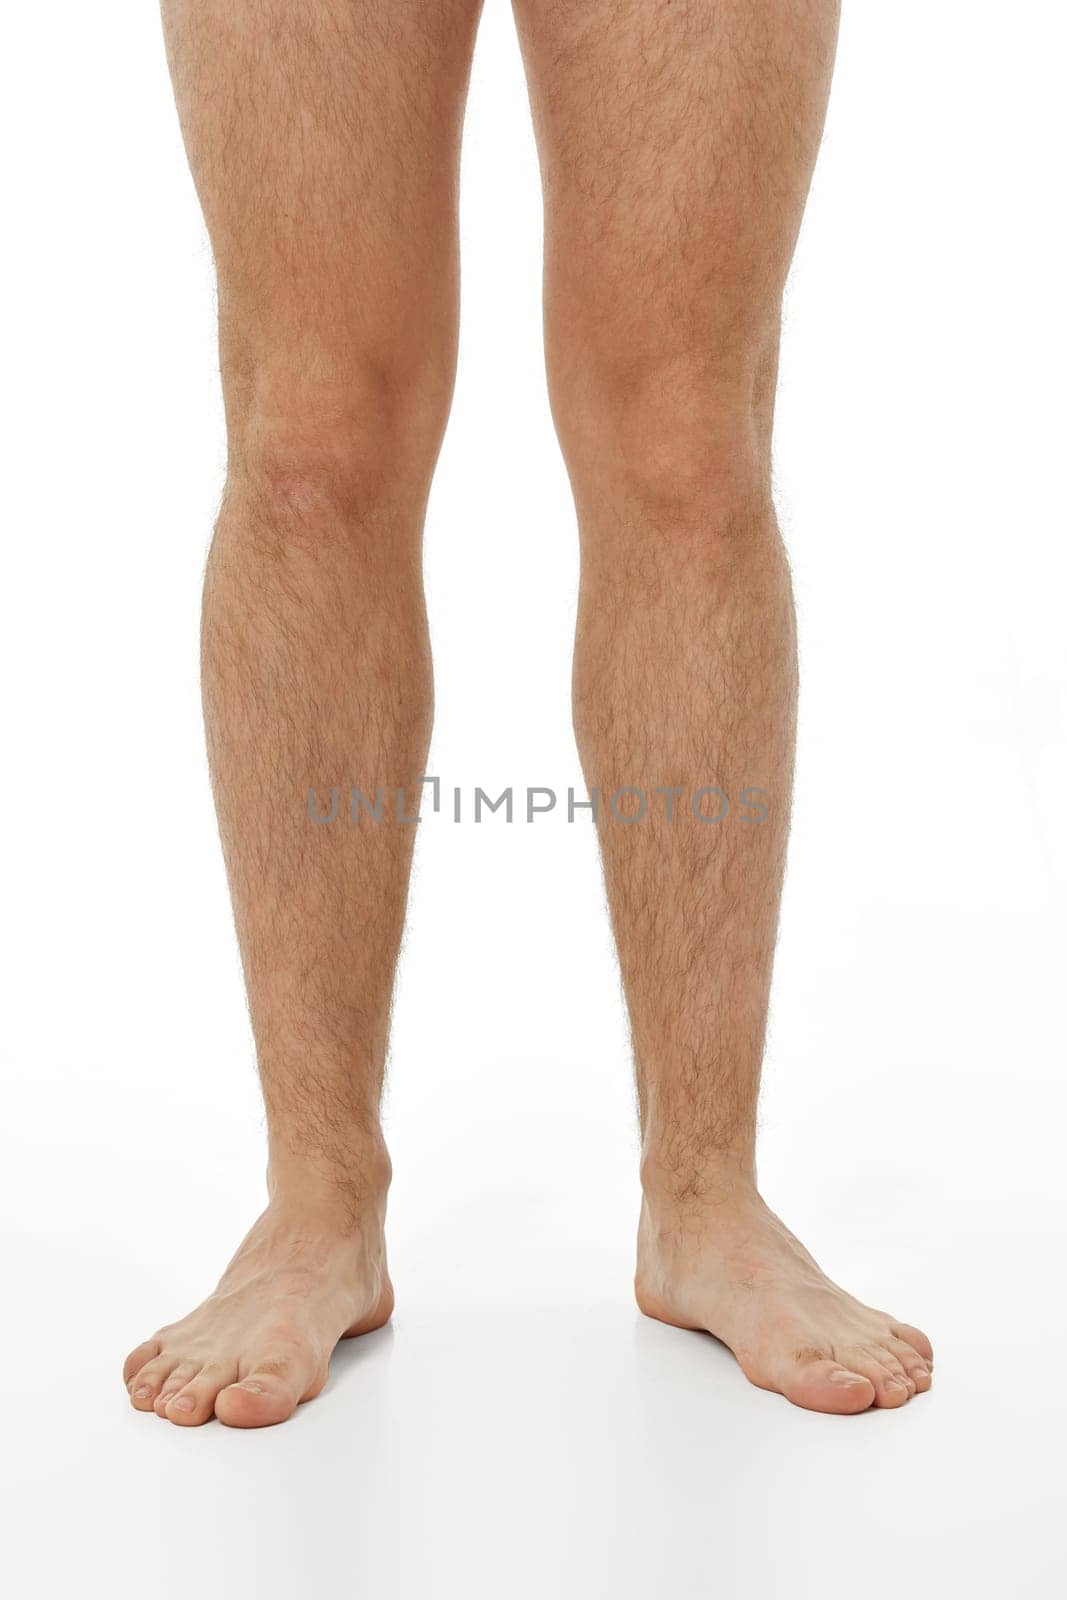 Barefoot male legs on white background. Body care concept.